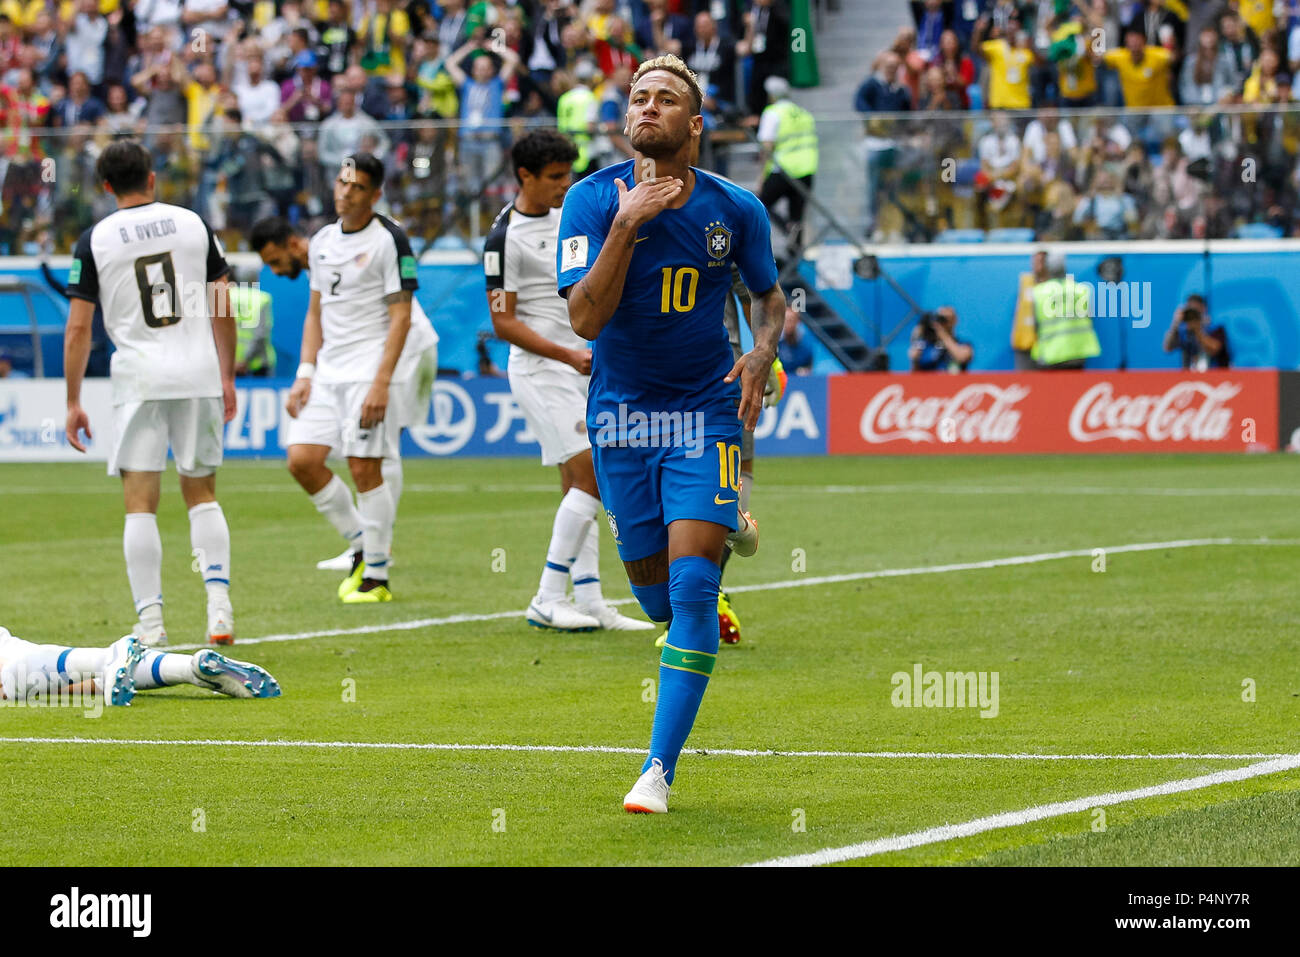 Saint Petersburg, Russia. 22nd June 2018. Neymar of Brazil celebrates after scoring his side's second goal to make the score 2-0 during the 2018 FIFA World Cup Group E match between Brazil and Costa Rica at Saint Petersburg Stadium on June 22nd 2018 in Saint Petersburg, Russia. (Photo by Daniel Chesterton/phcimages.com) Credit: PHC Images/Alamy Live News Stock Photo